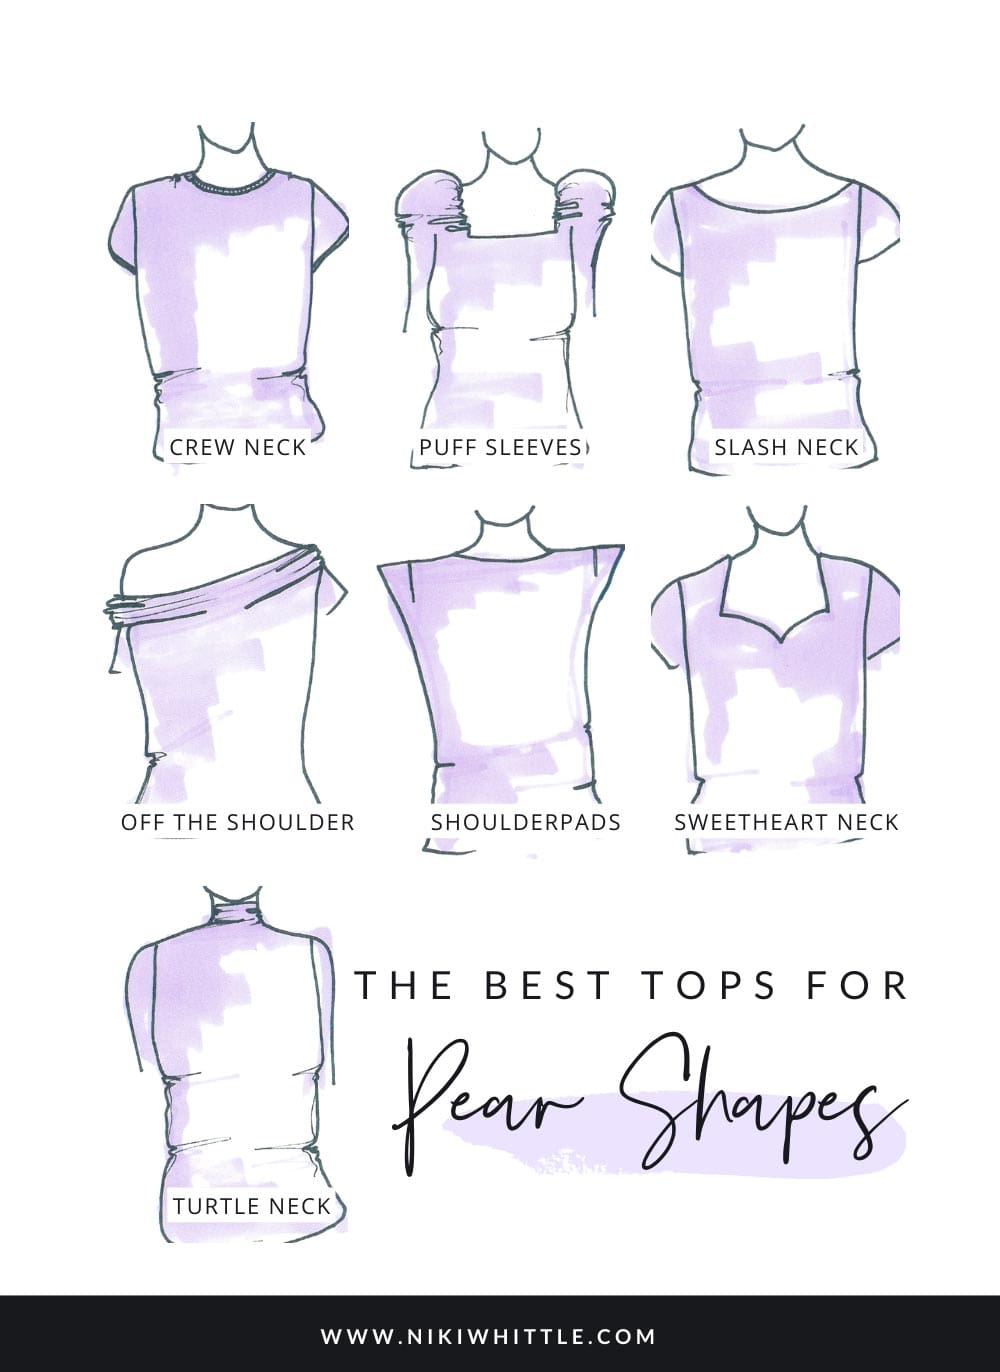 Images of tops that flatter a pear shape